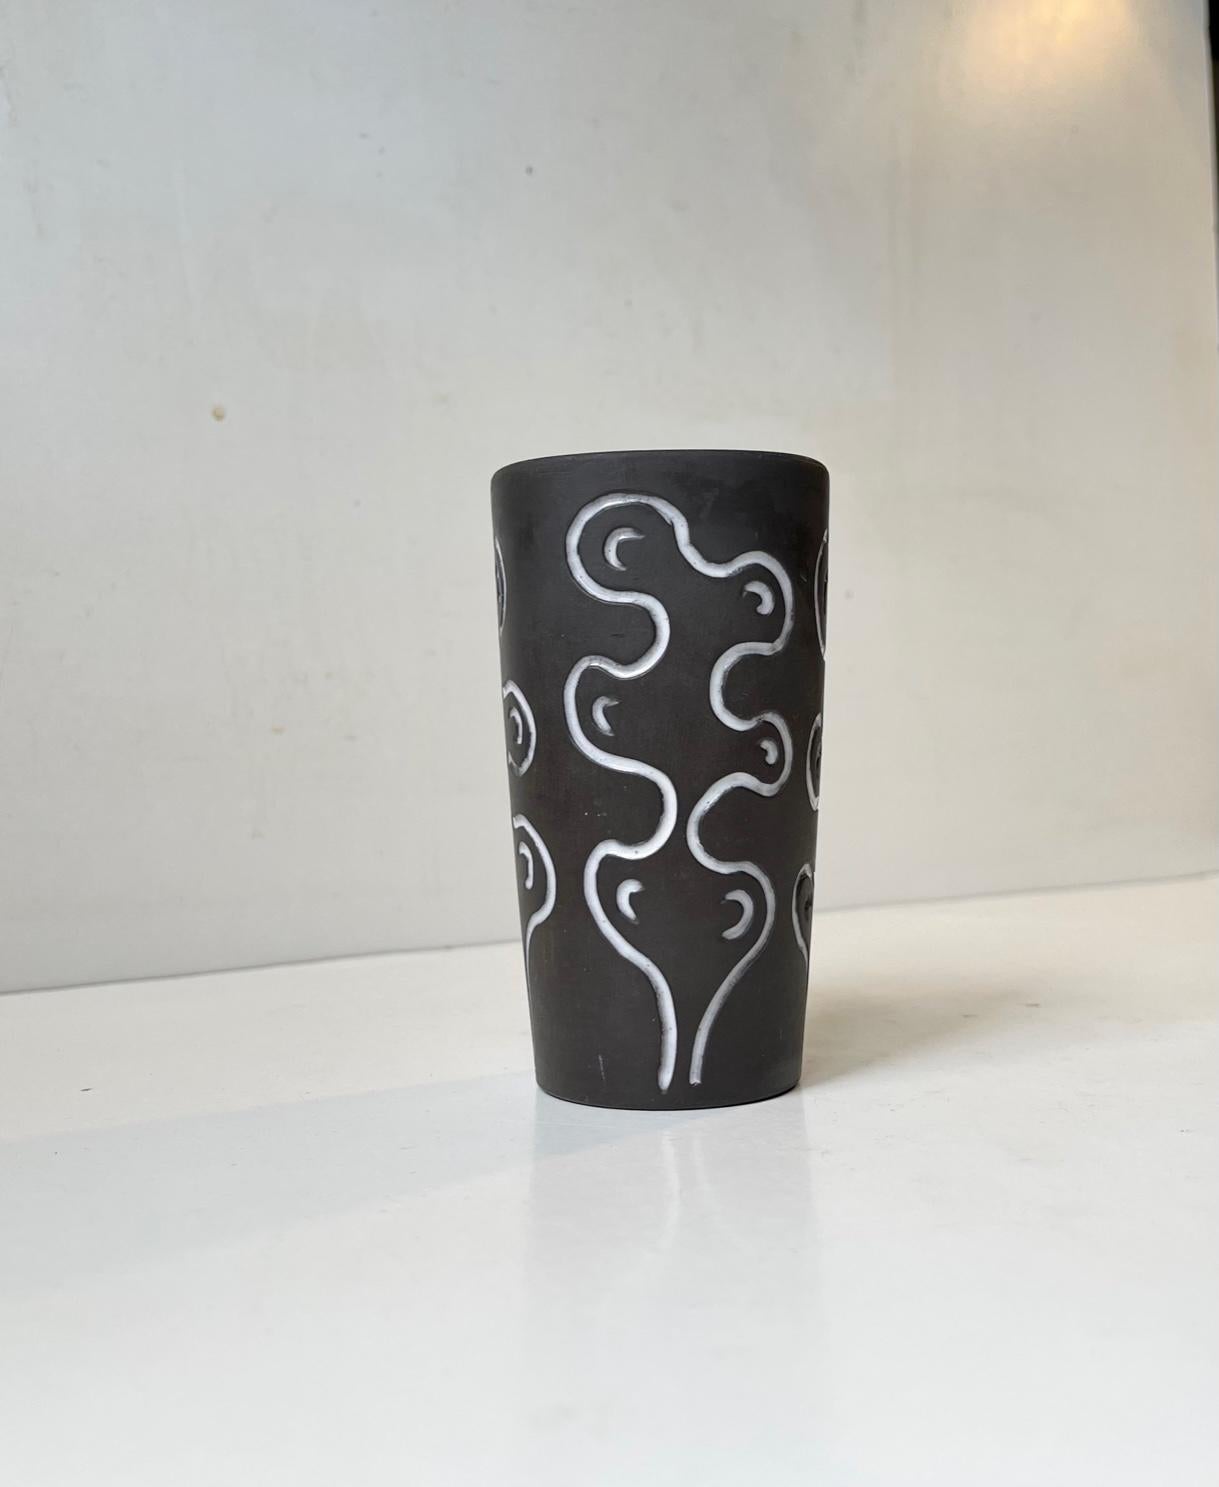 Ceramic vase decorated in glaze with abstract white motif and interior teal green glaze. Designed by the danish ceramist Helge Østerberg and manufactured at his own studio during the 1960s. Its signed Ø and marked with country of origin to the base.